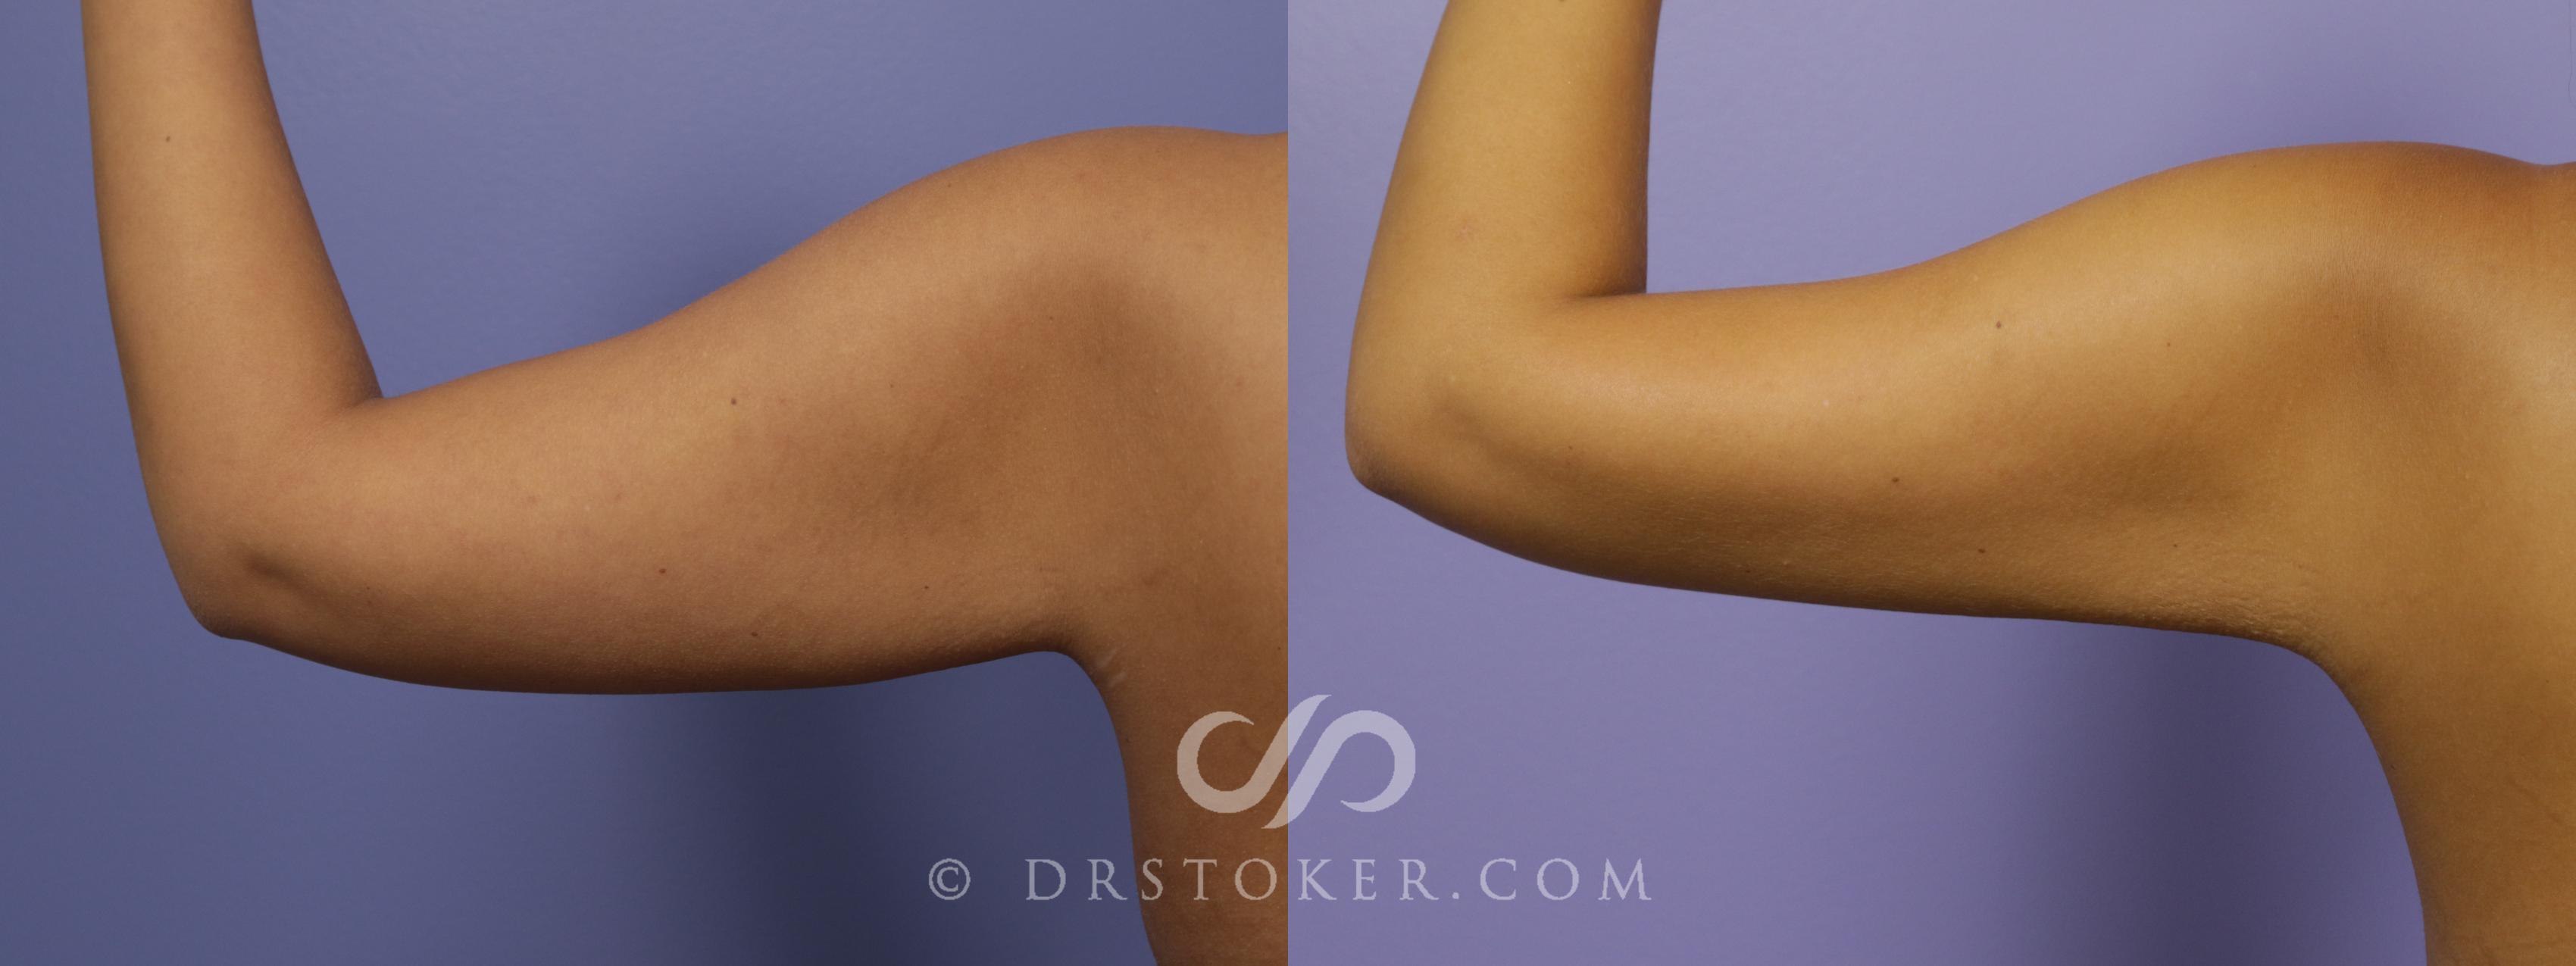 Before & After Liposuction - Axillary Fat Removal Case 1481 View #1 View in Marina del Rey, CA